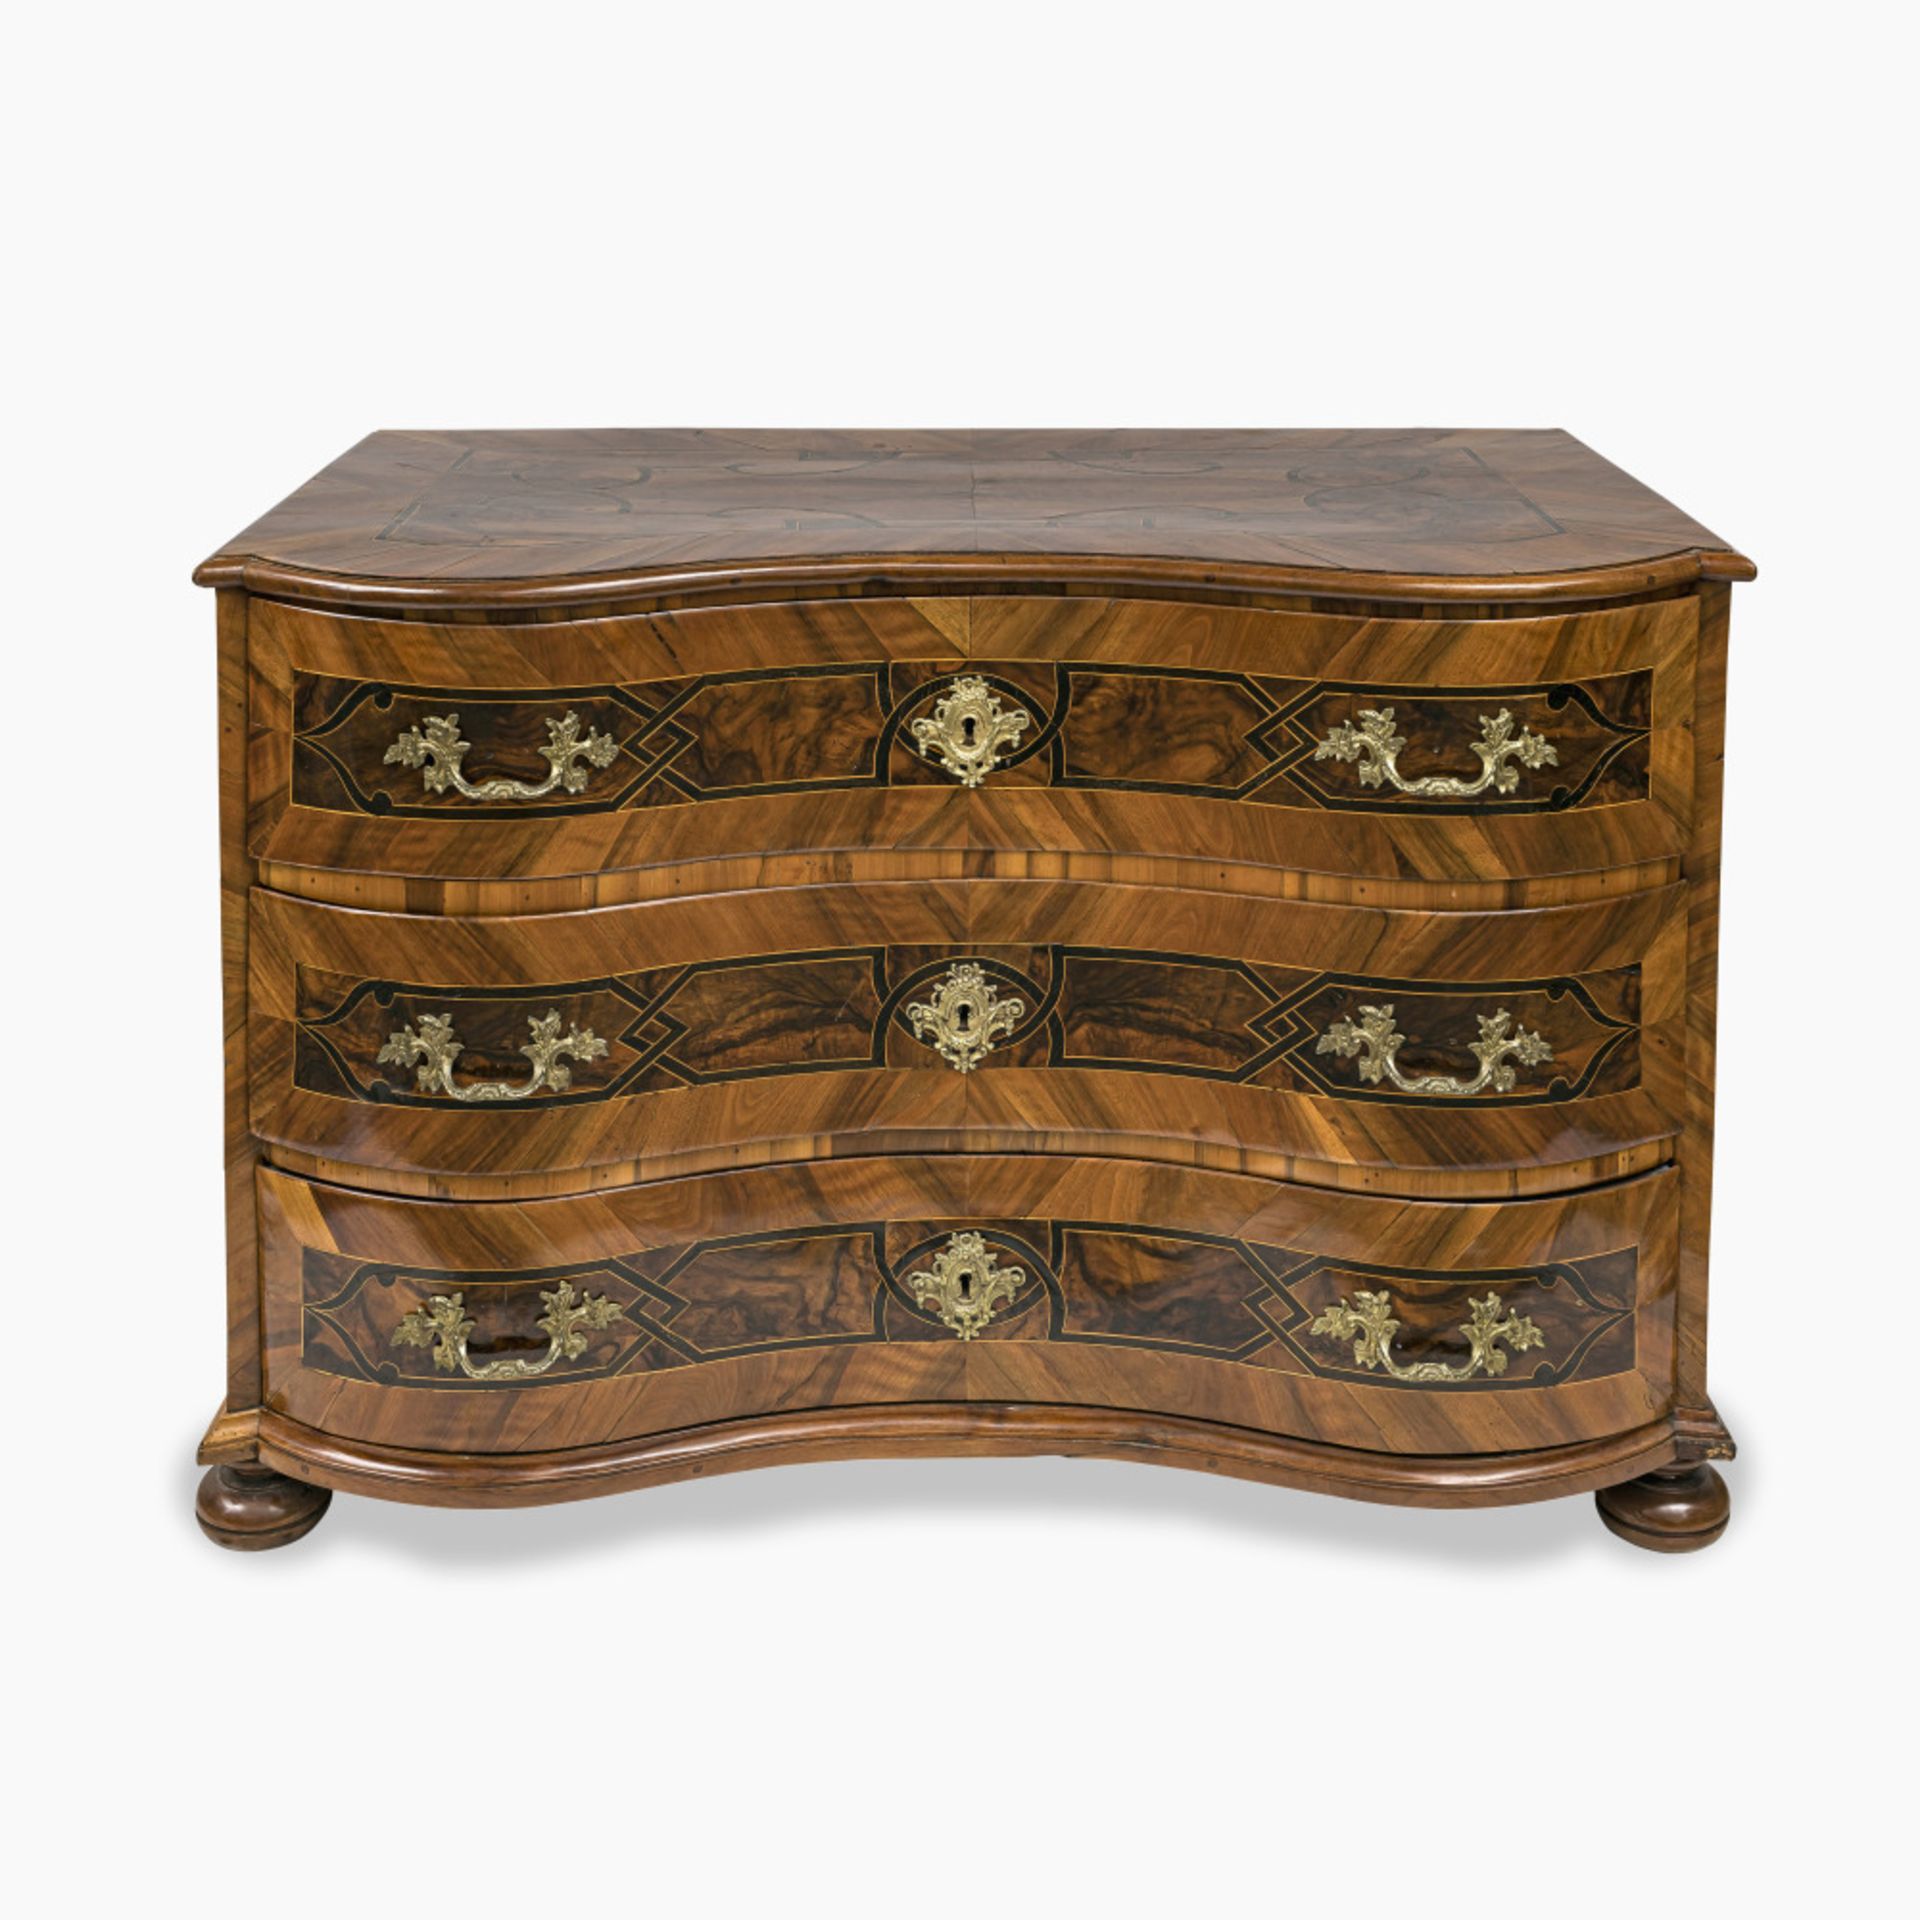 A commode - South German, 18th century